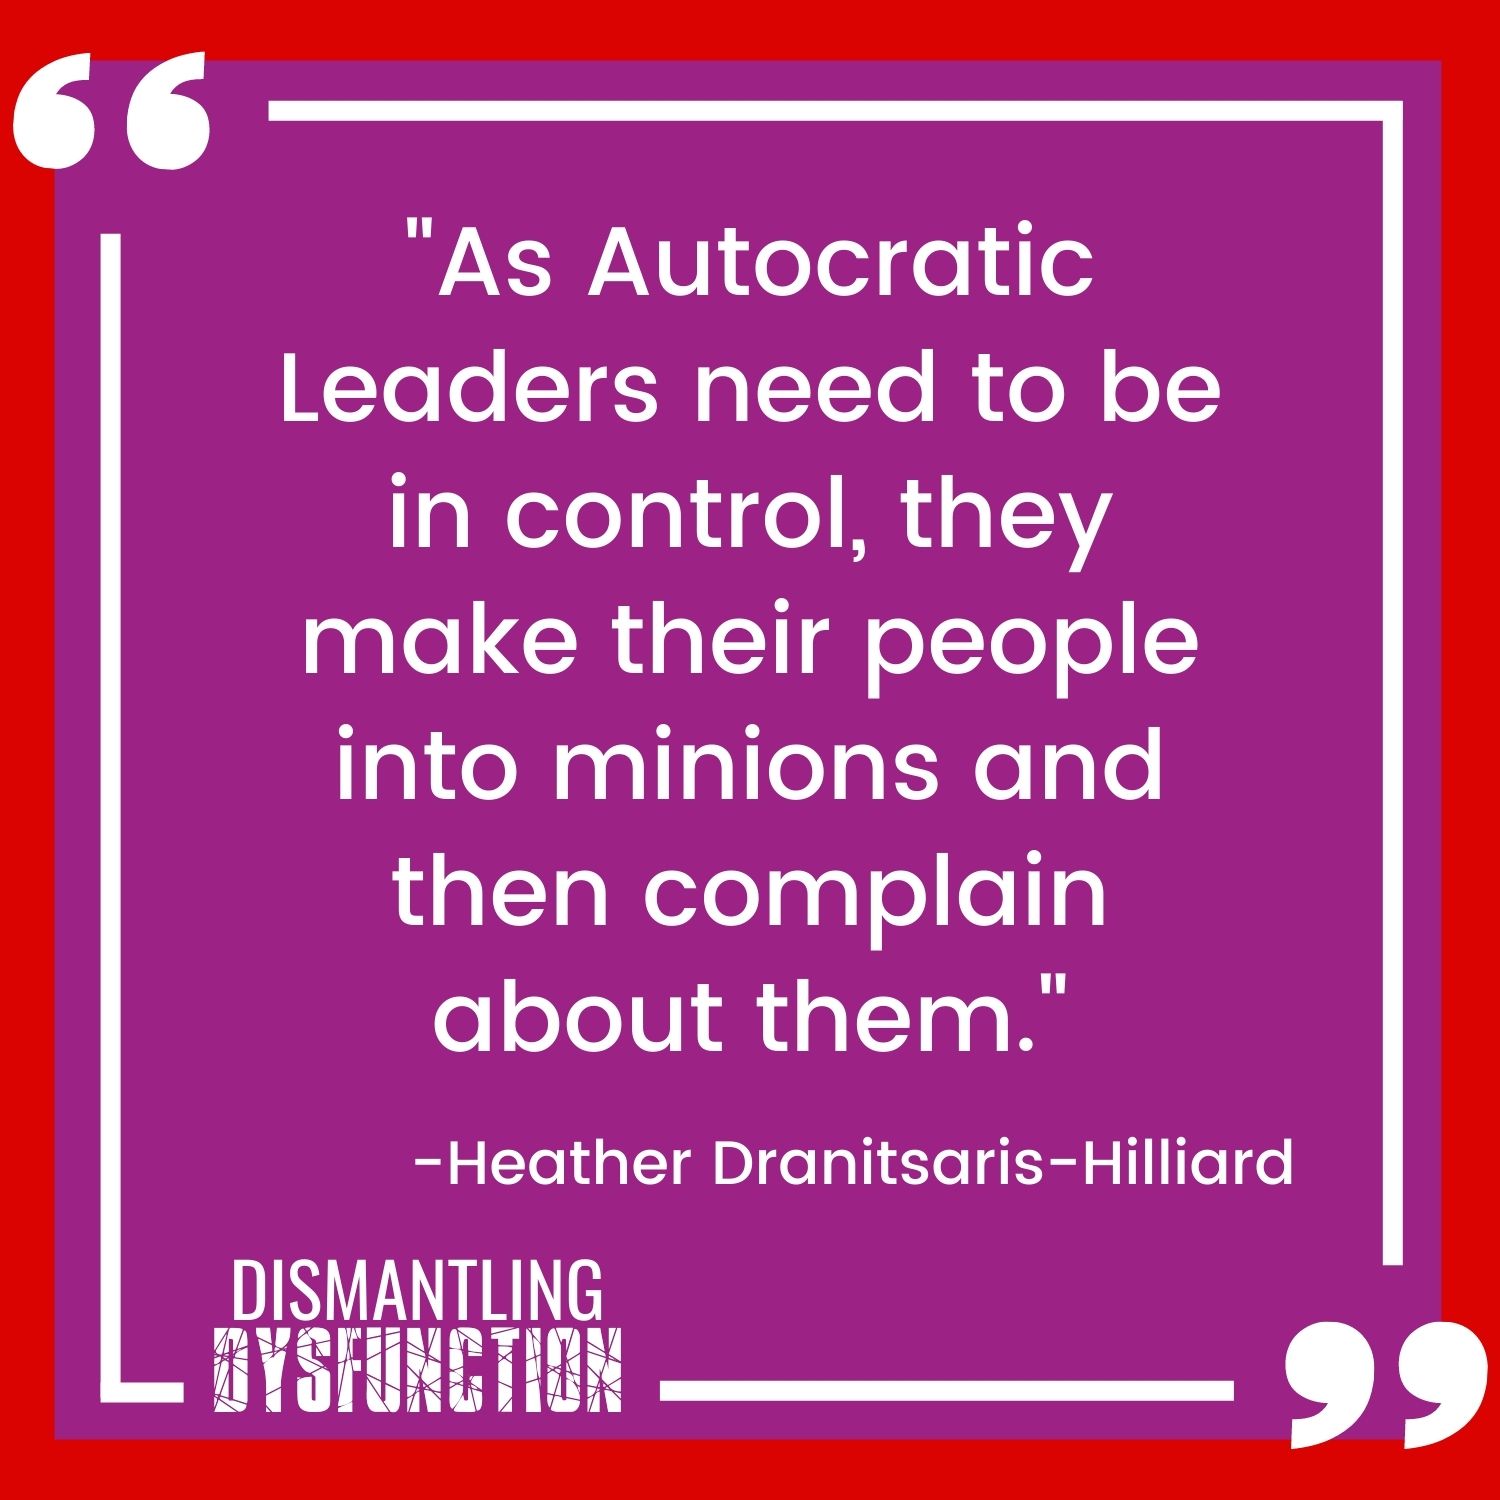 As autocratic leaders need to be in control, they make their people into minions and then complain about them - Heather Dranitsaris-Hilliard quote